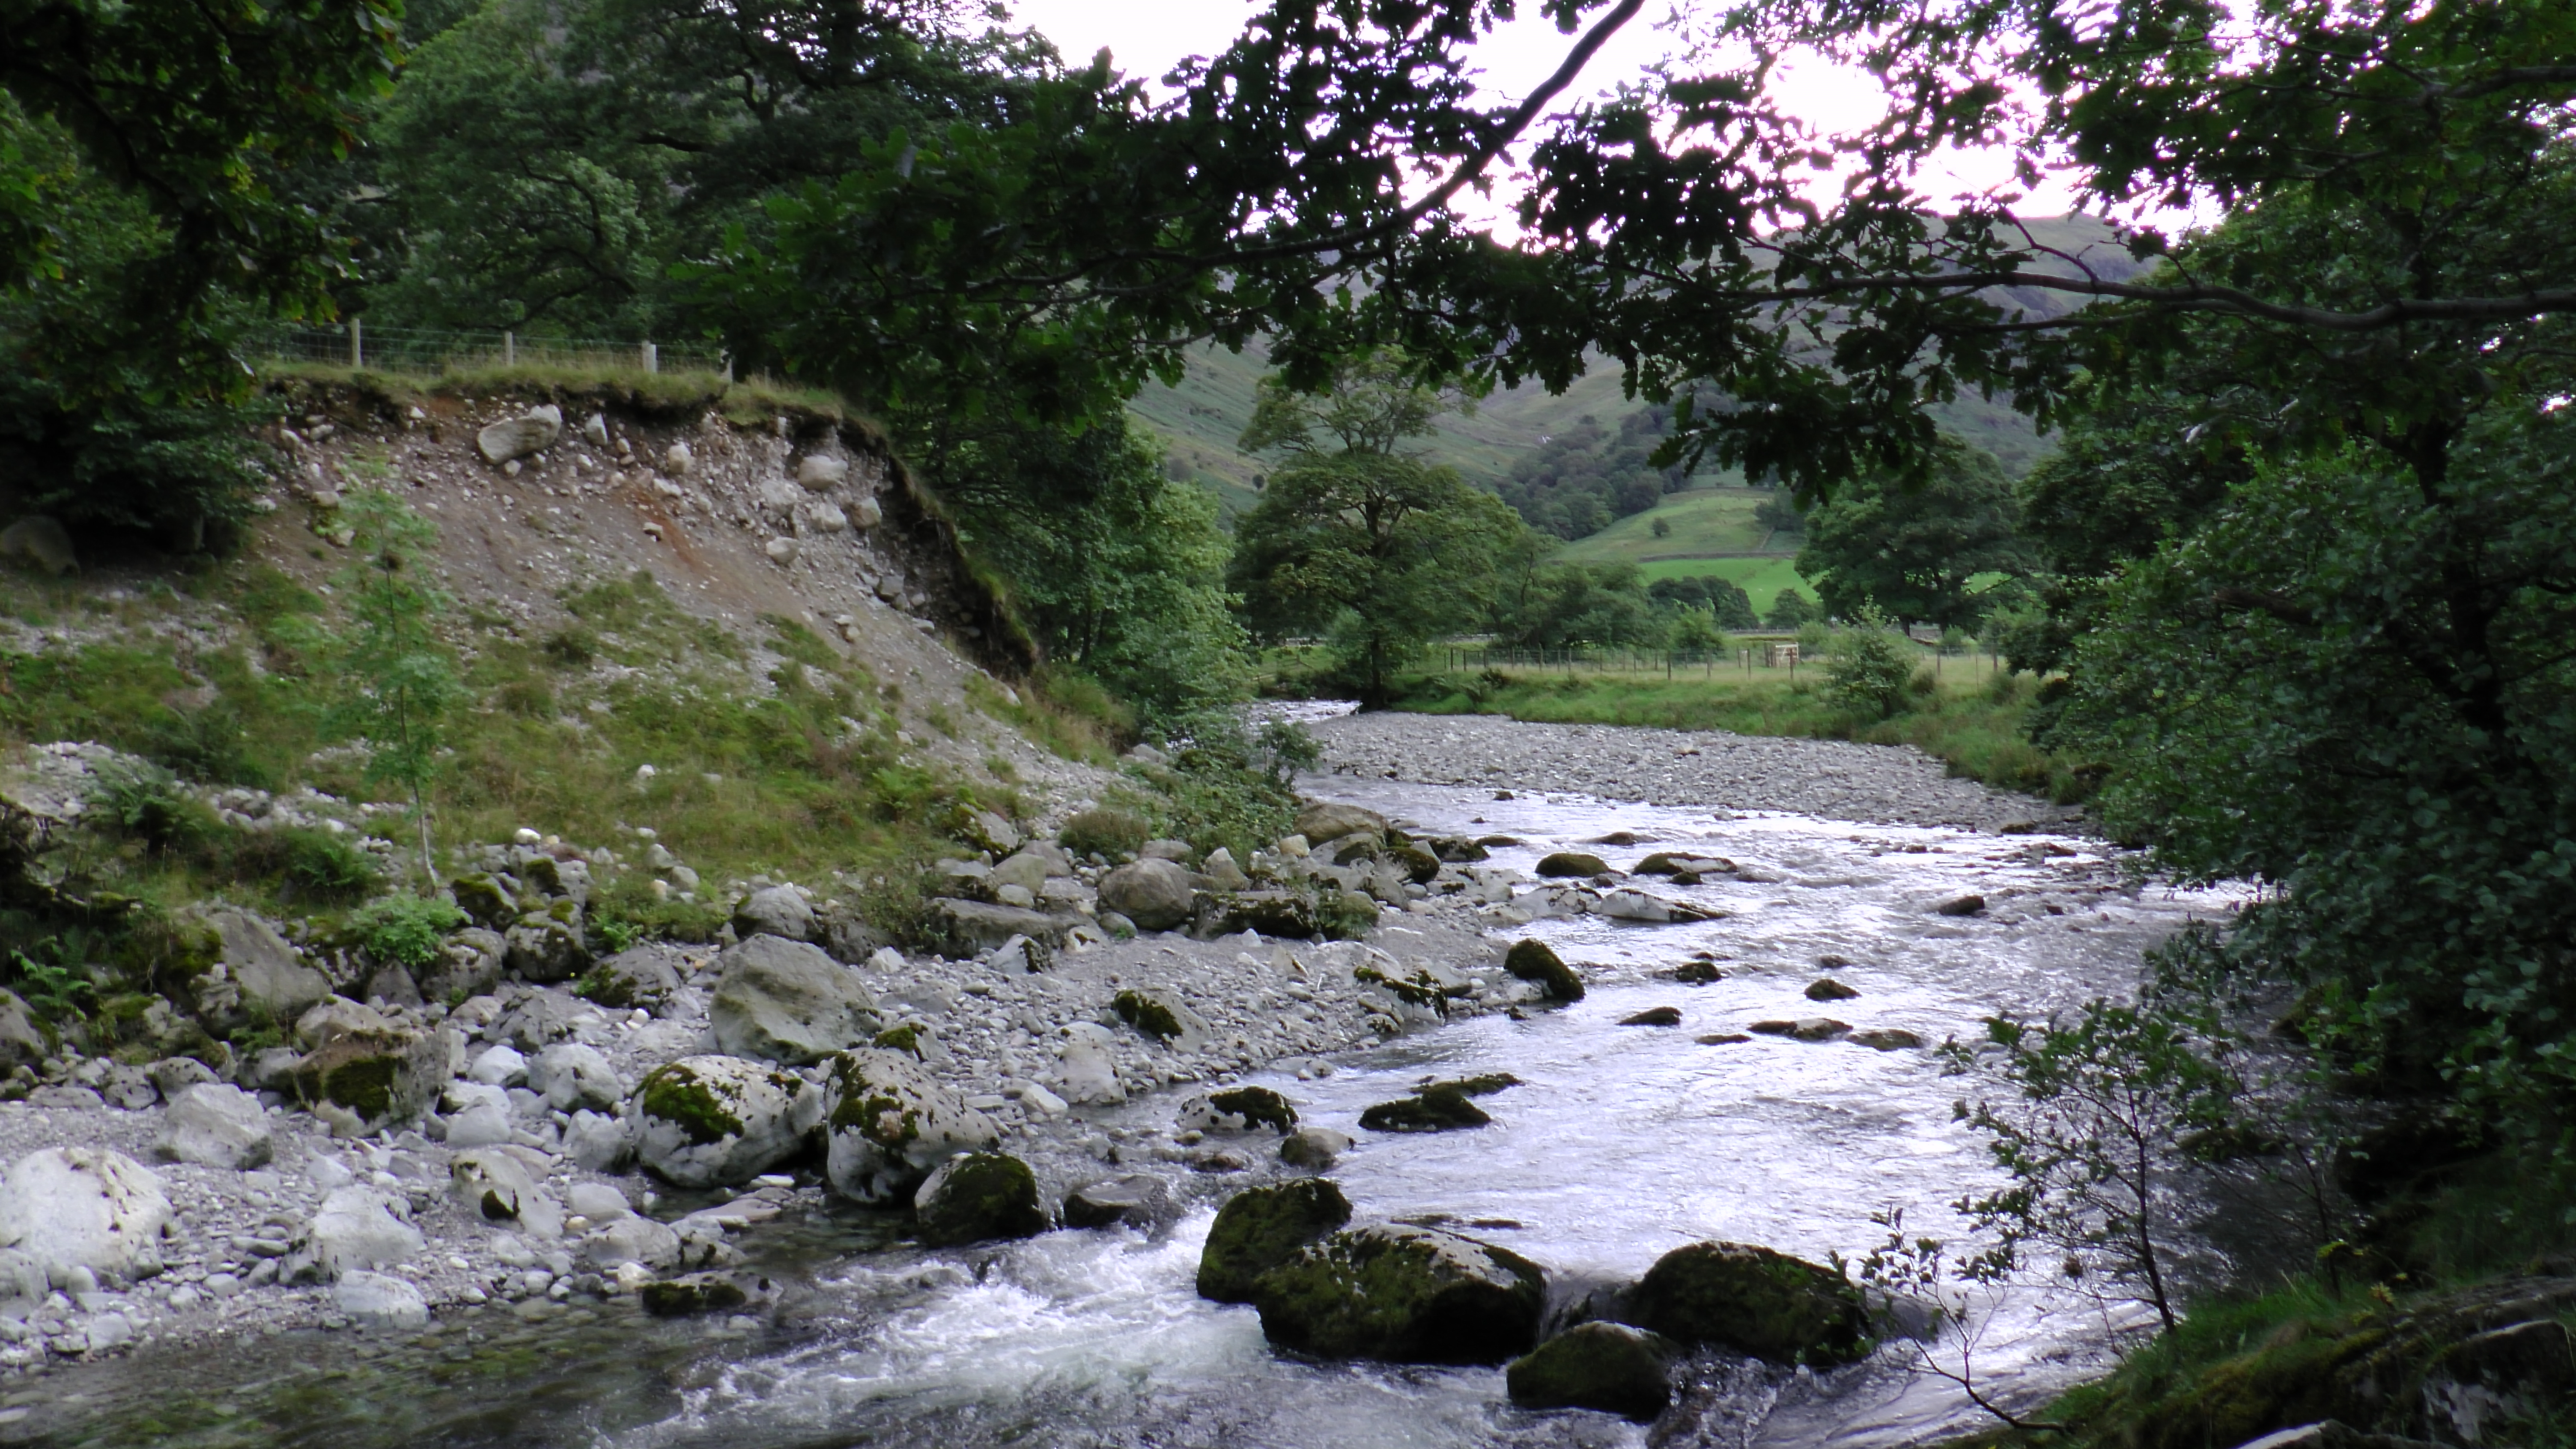 On the approach to Stonethwaite